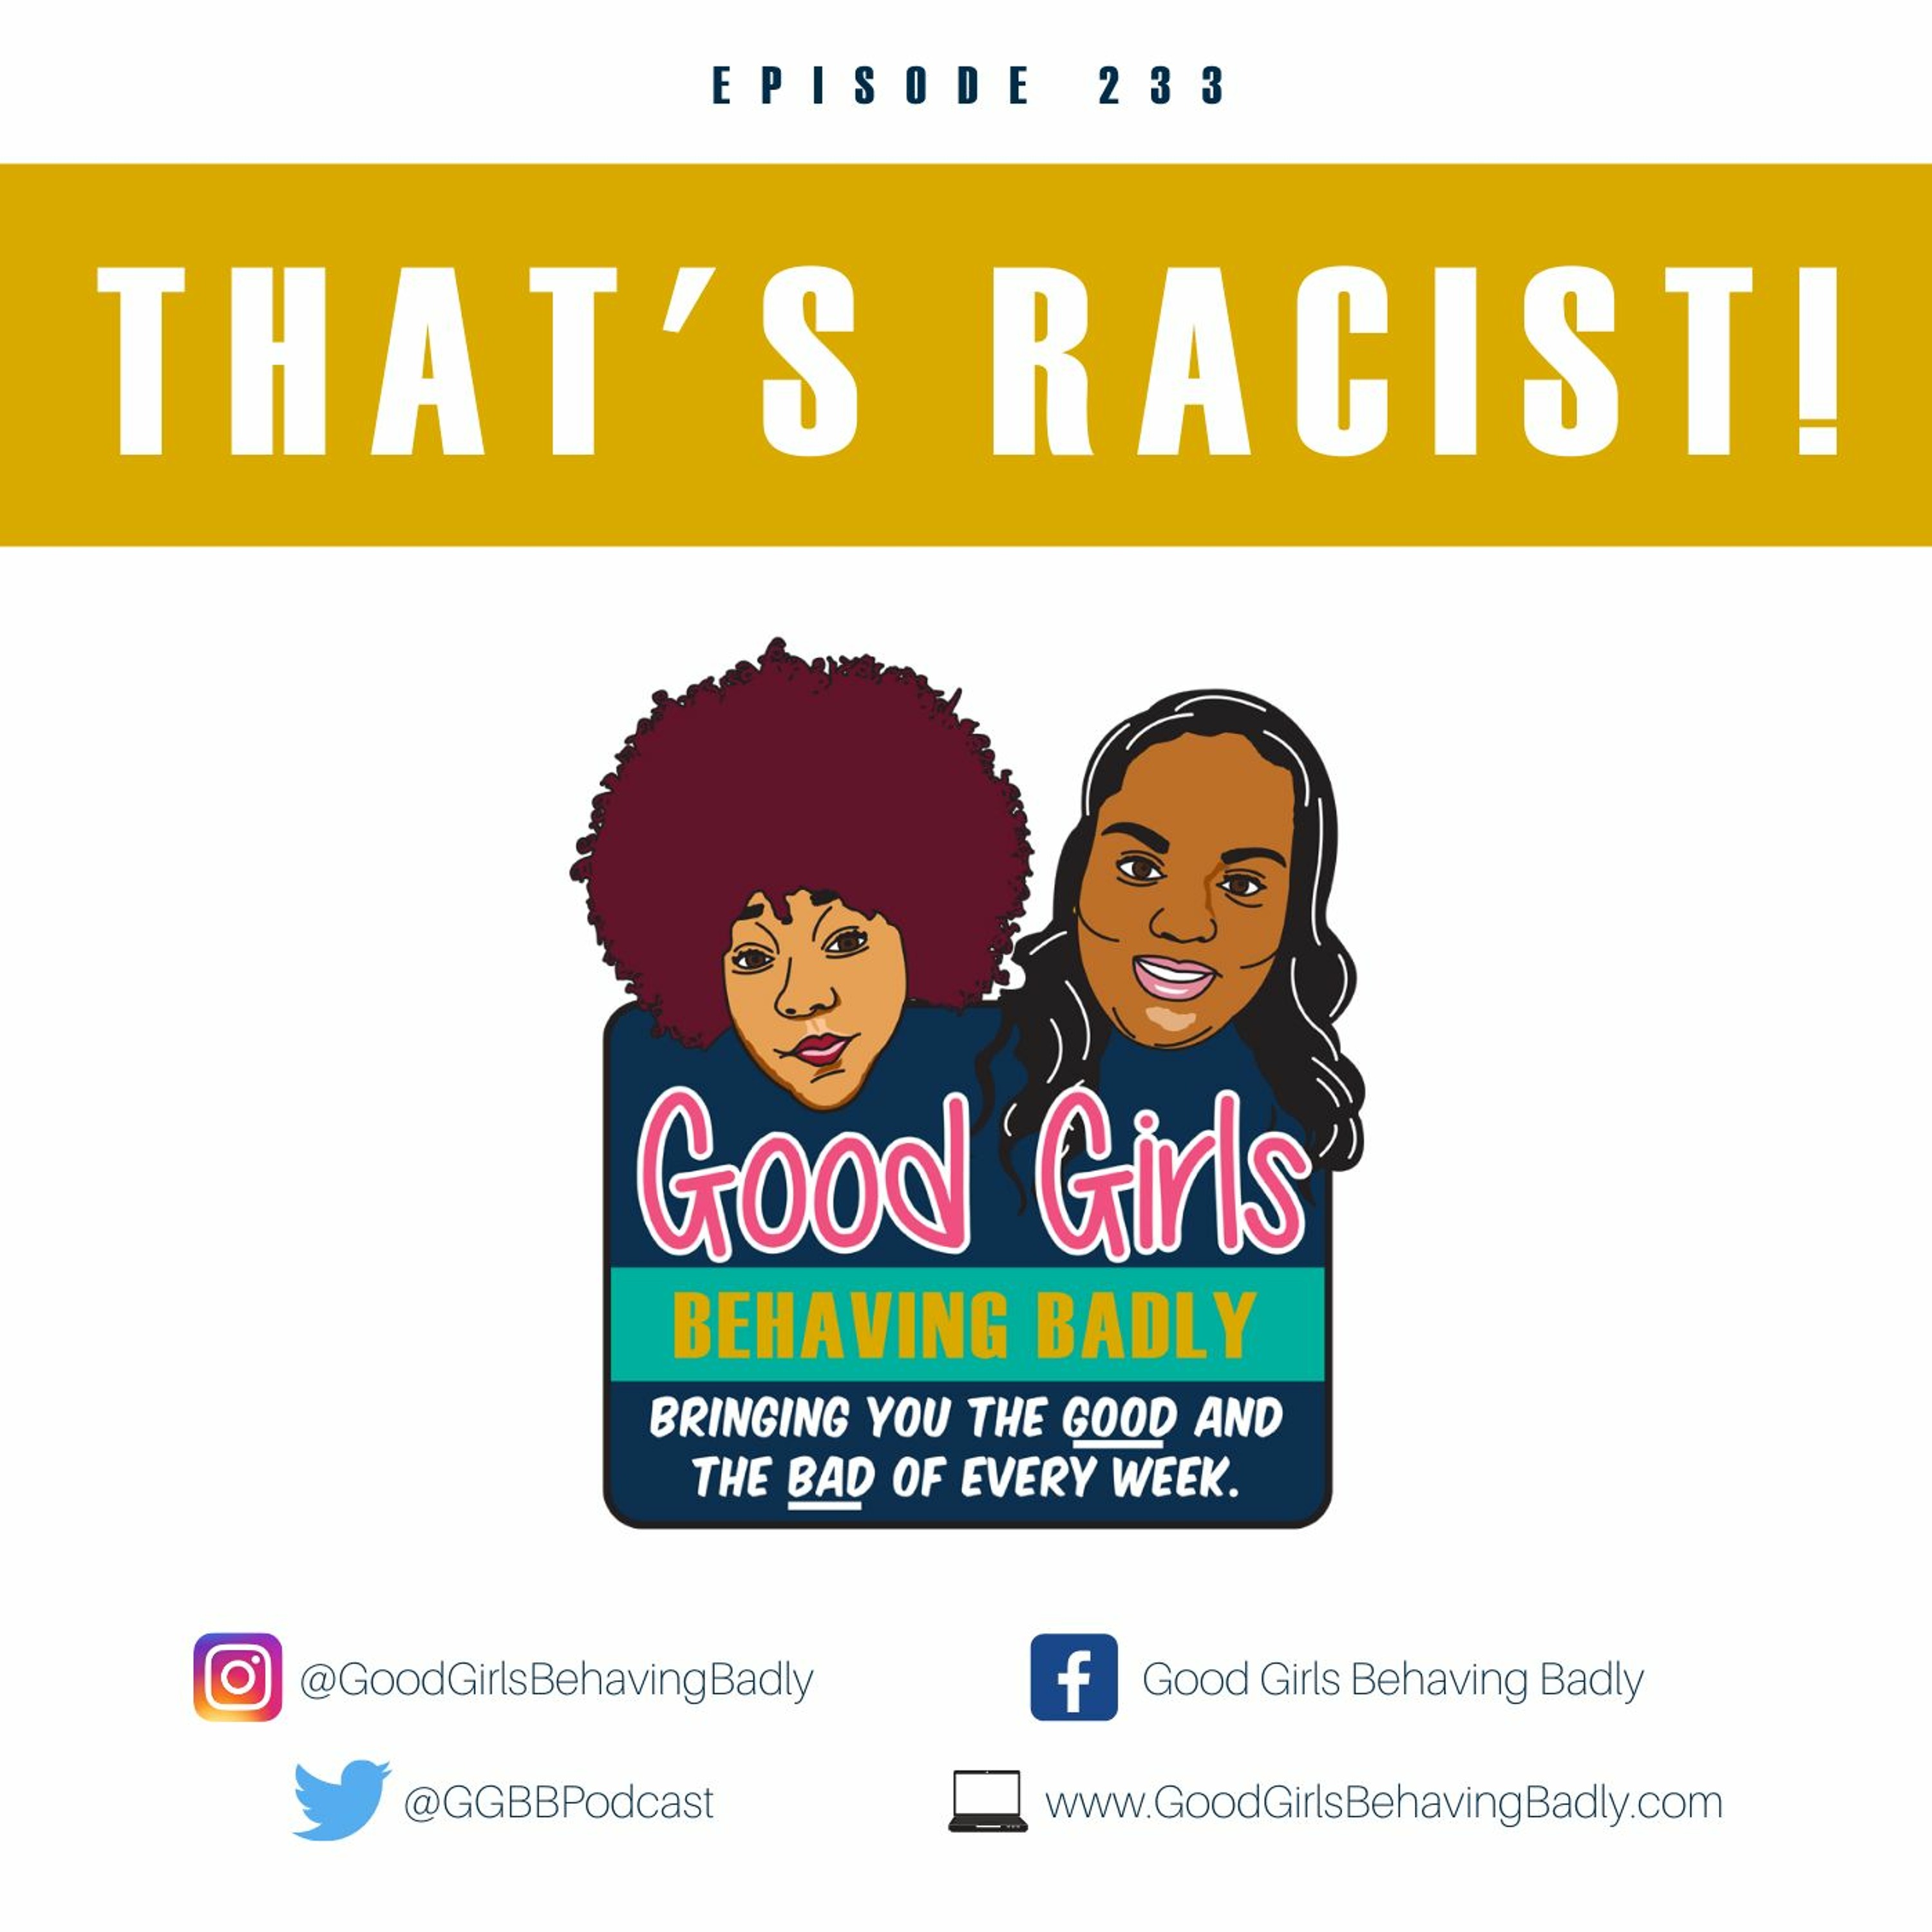 Episode 233: That's Racist!